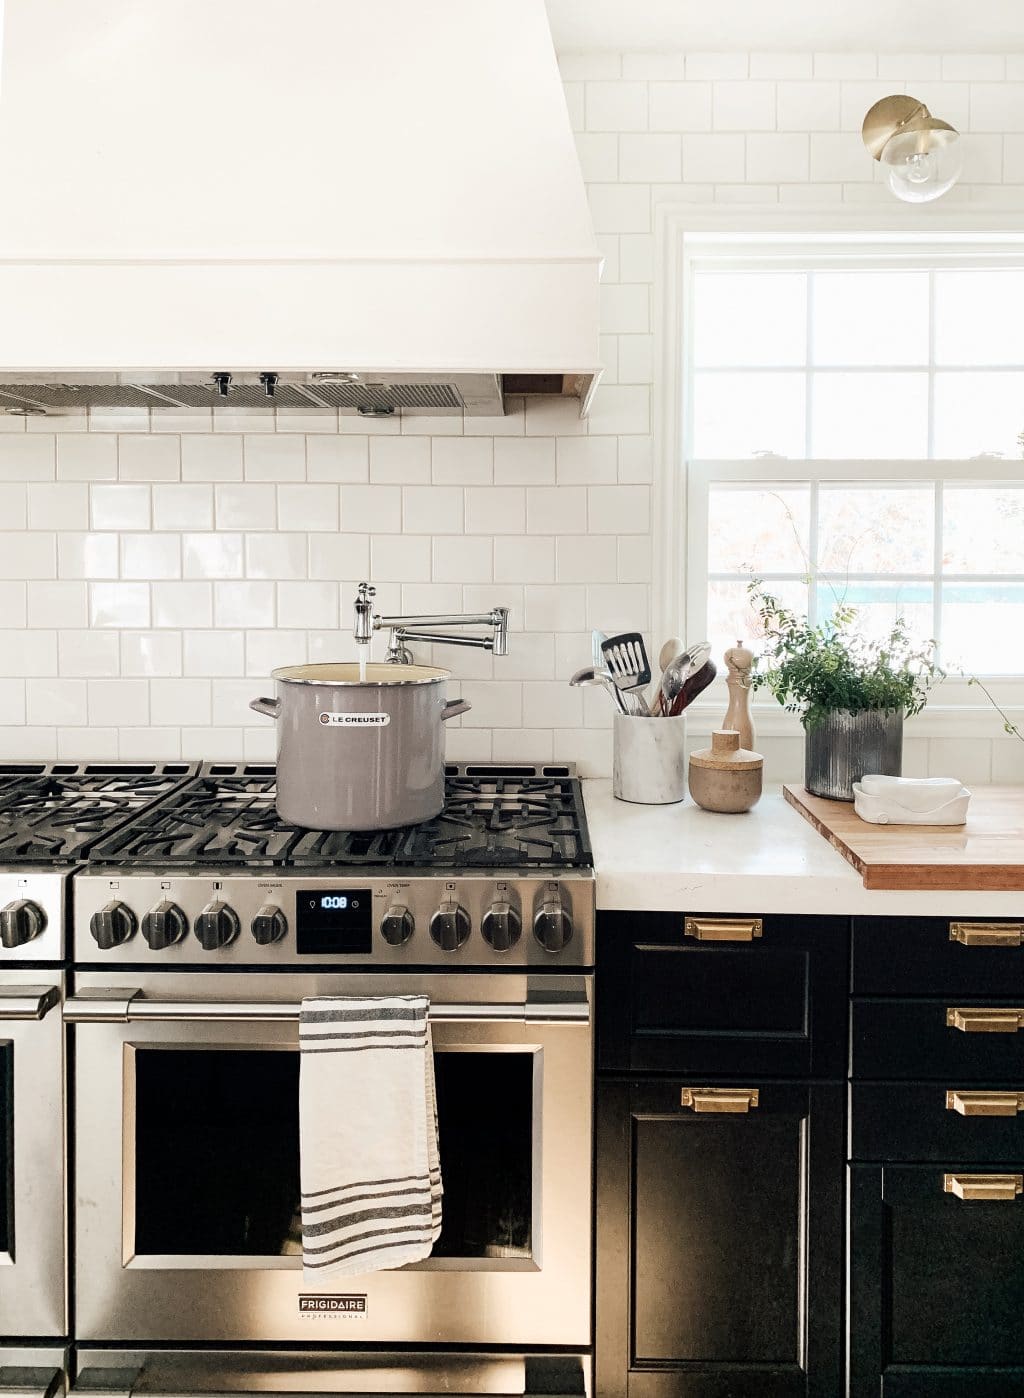 All The Kitchen Essentials You Need — For Just $310